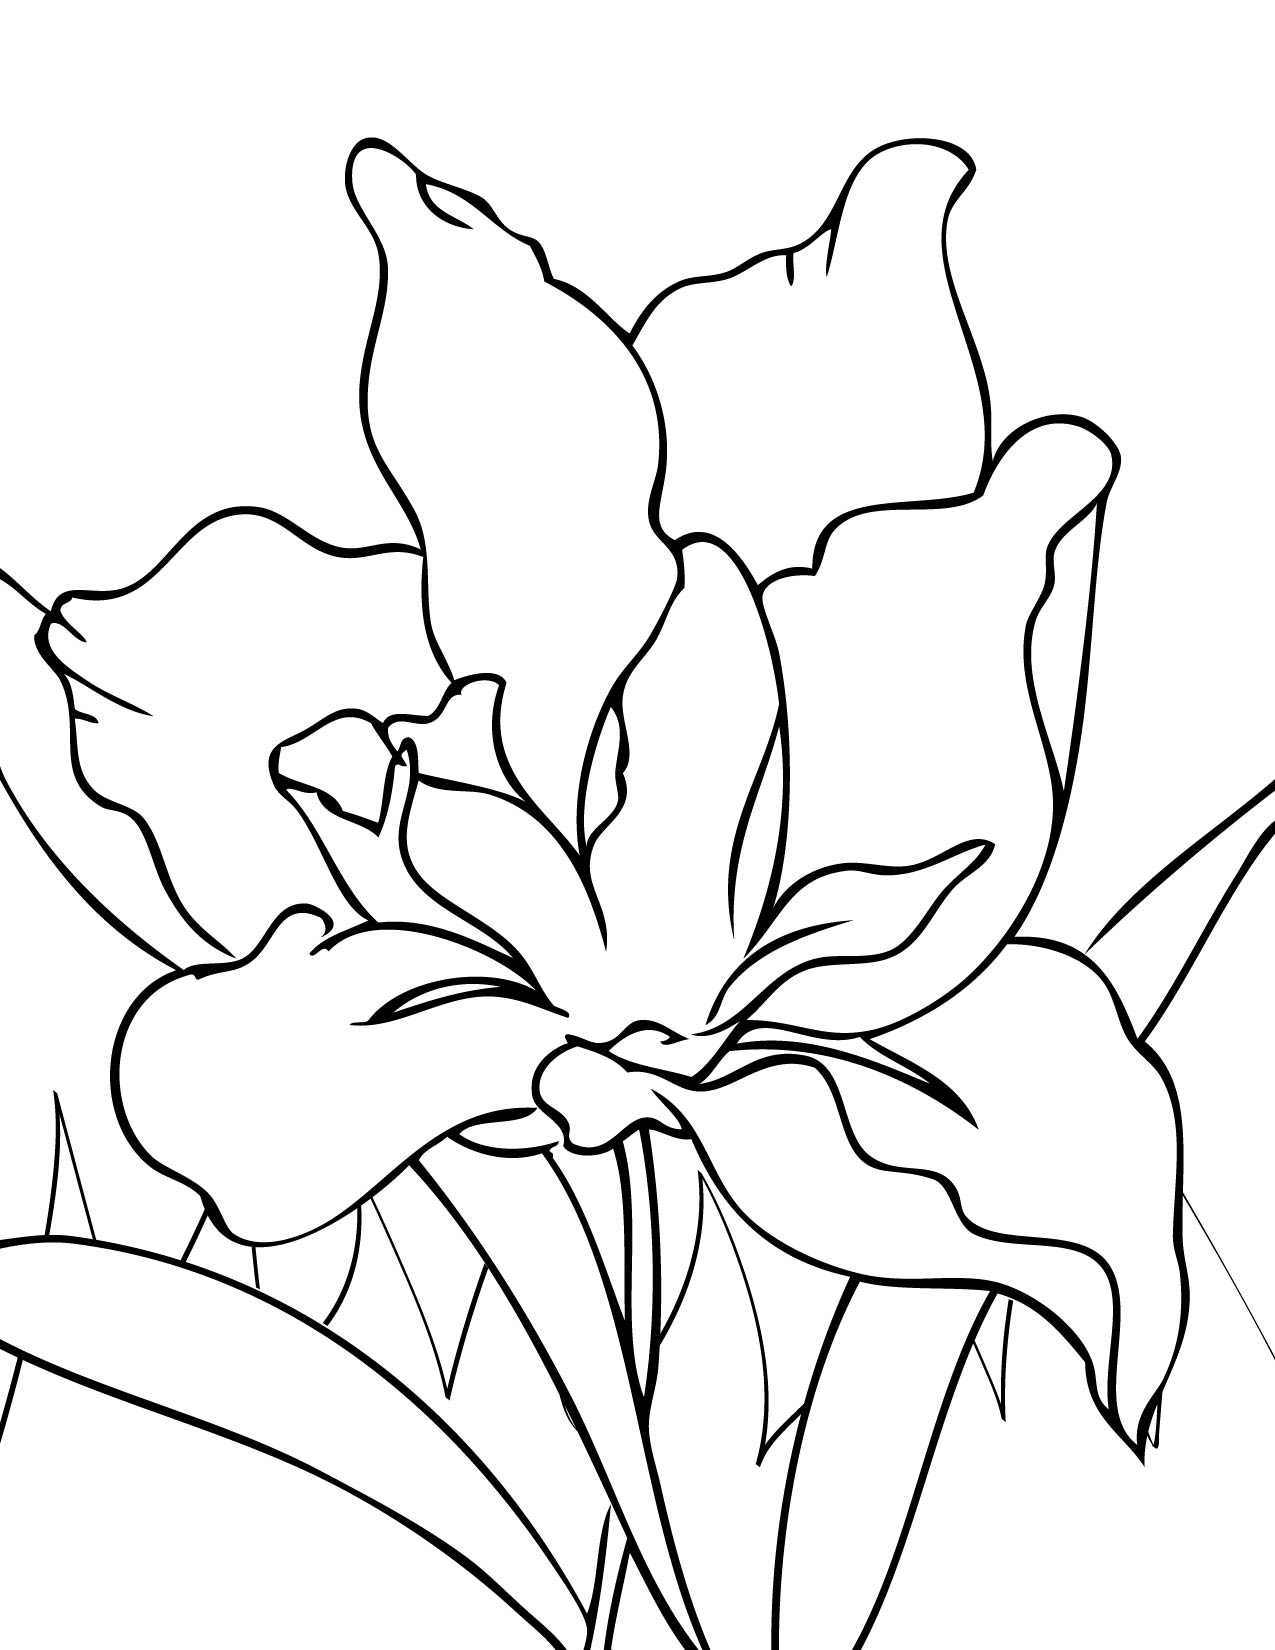  Flowers coloring pages | color printing | Flower | Coloring pages free | #65